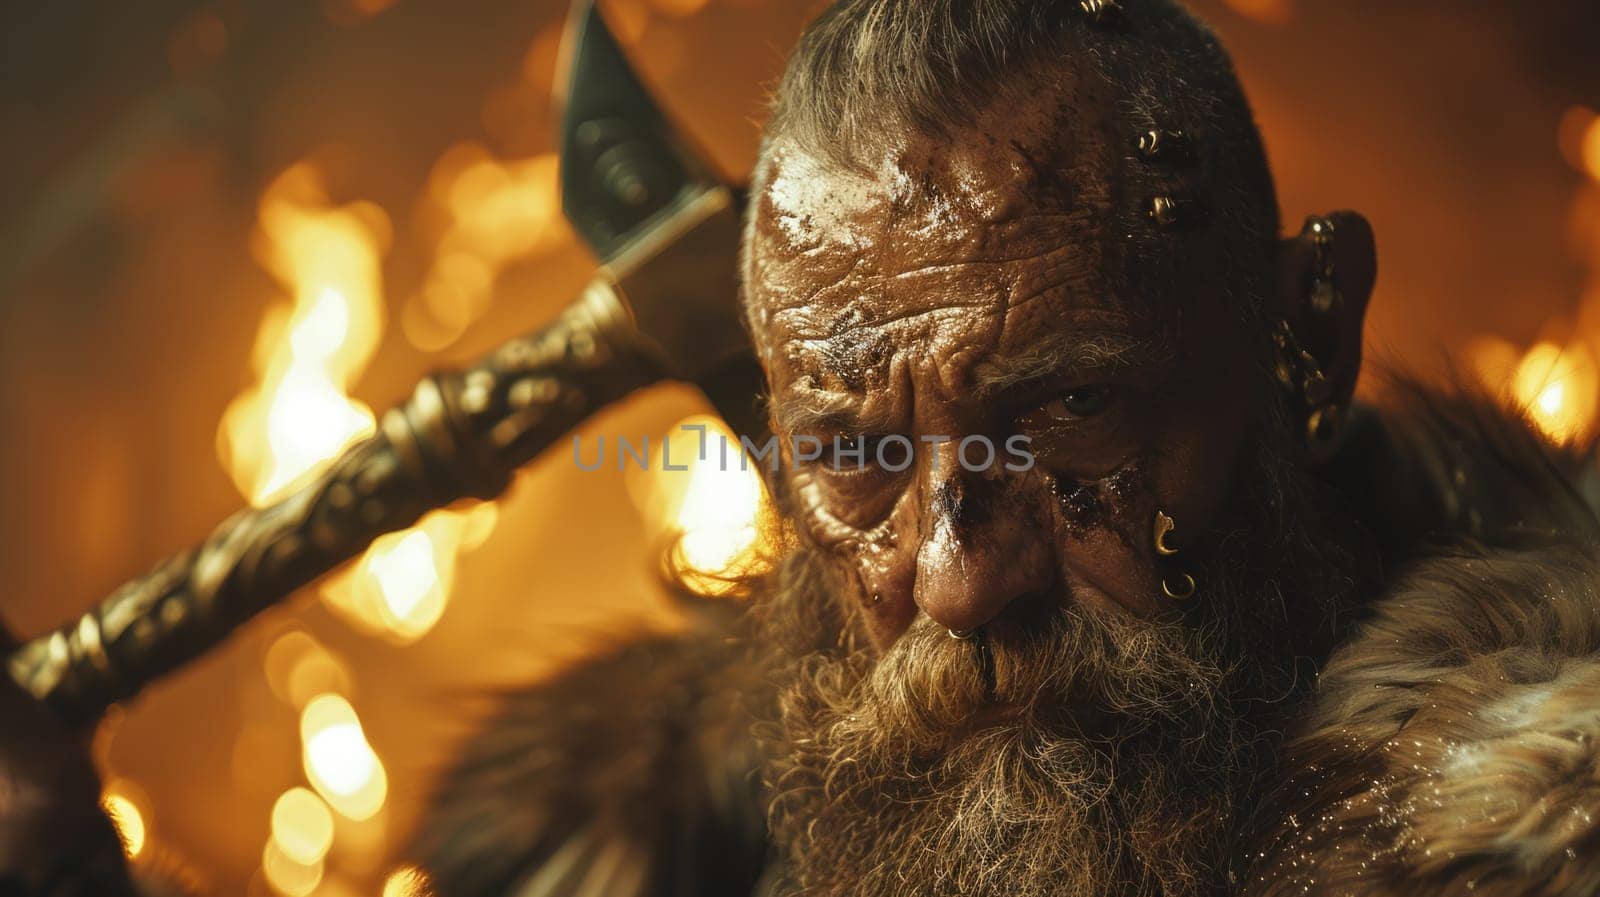 A close up of a man with a large axe, focused and determined, ready for battle by but_photo